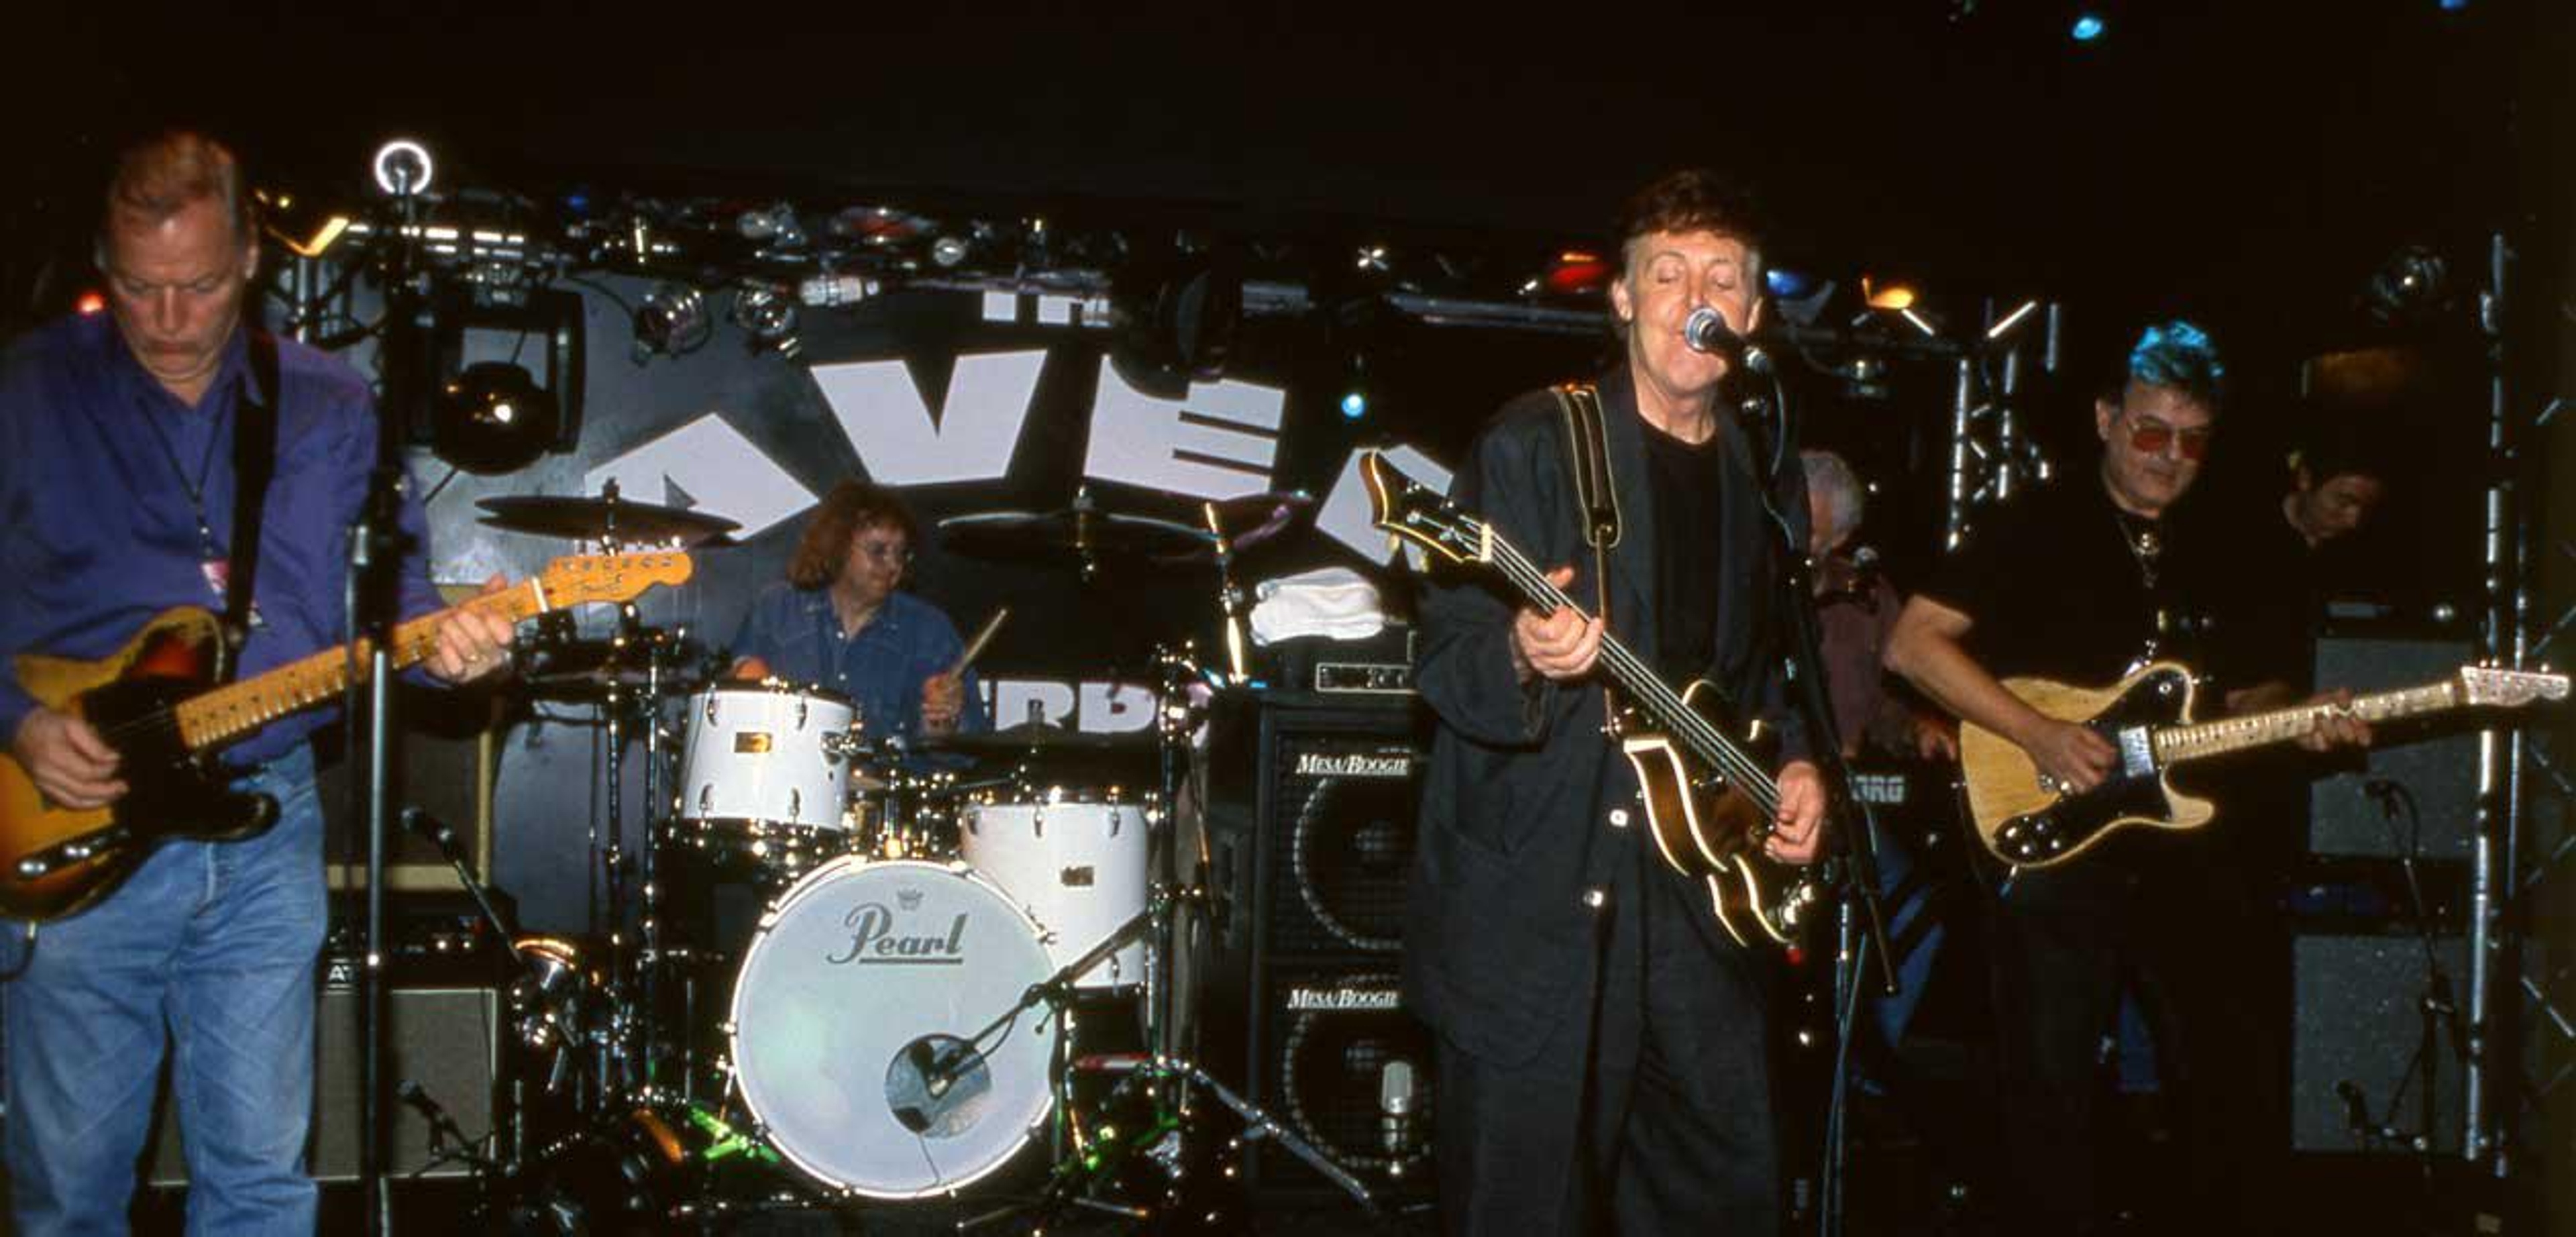 Live At The Cavern